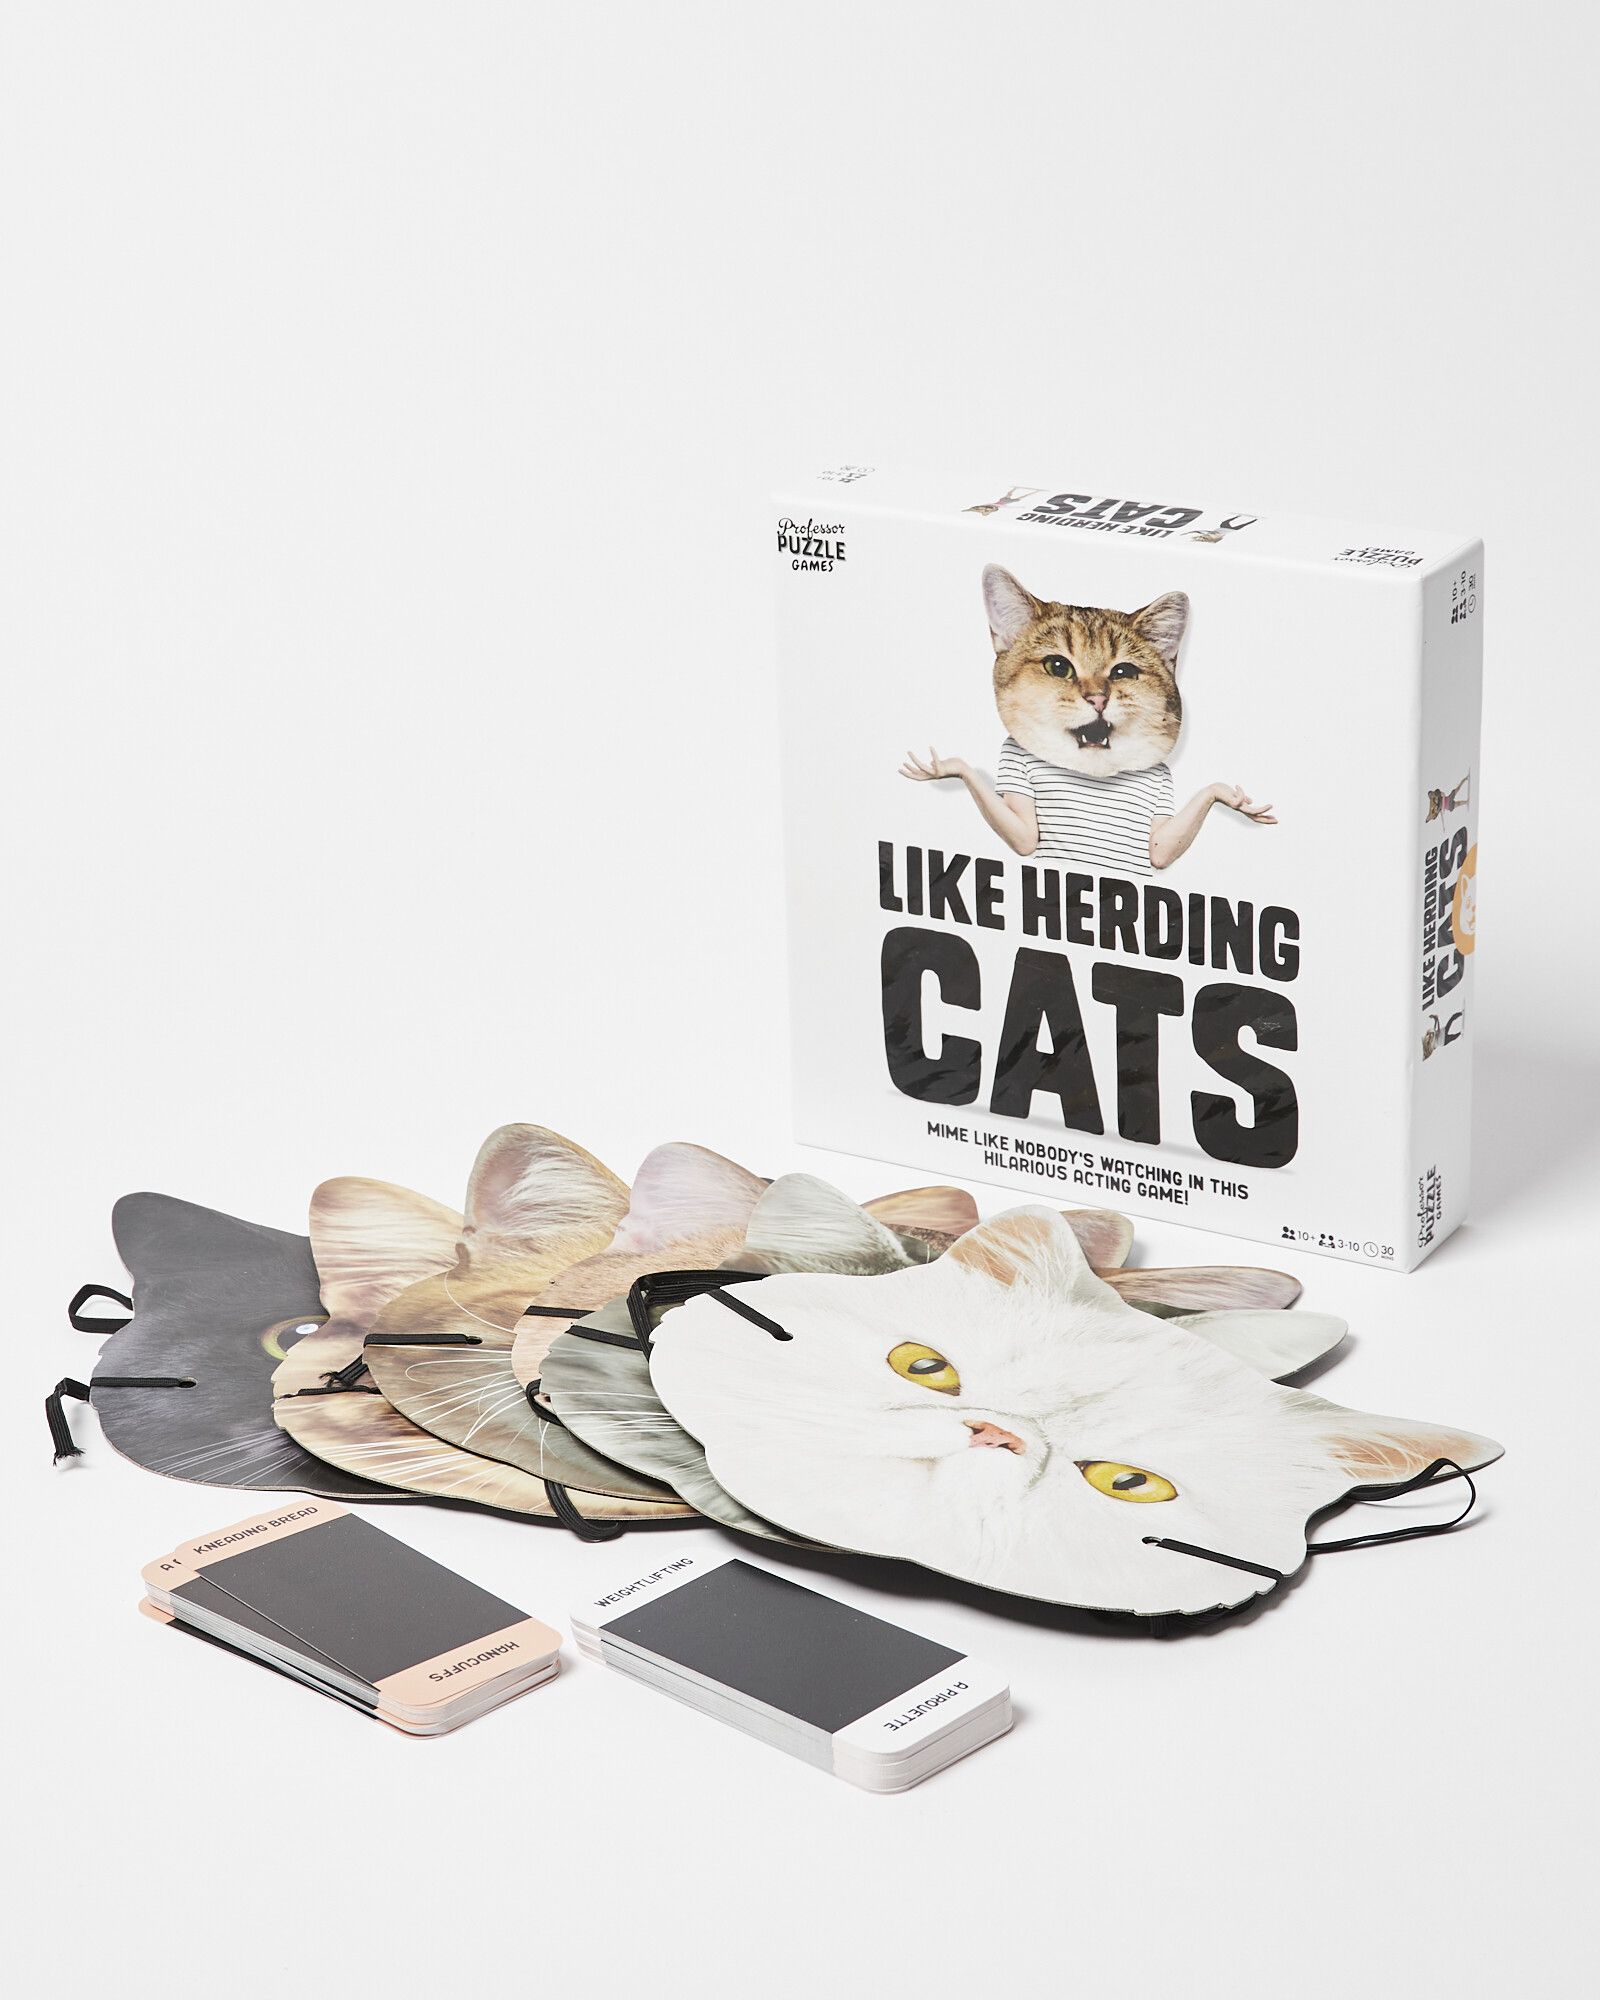 Herding Cats is chaos  Beer and Board Games 